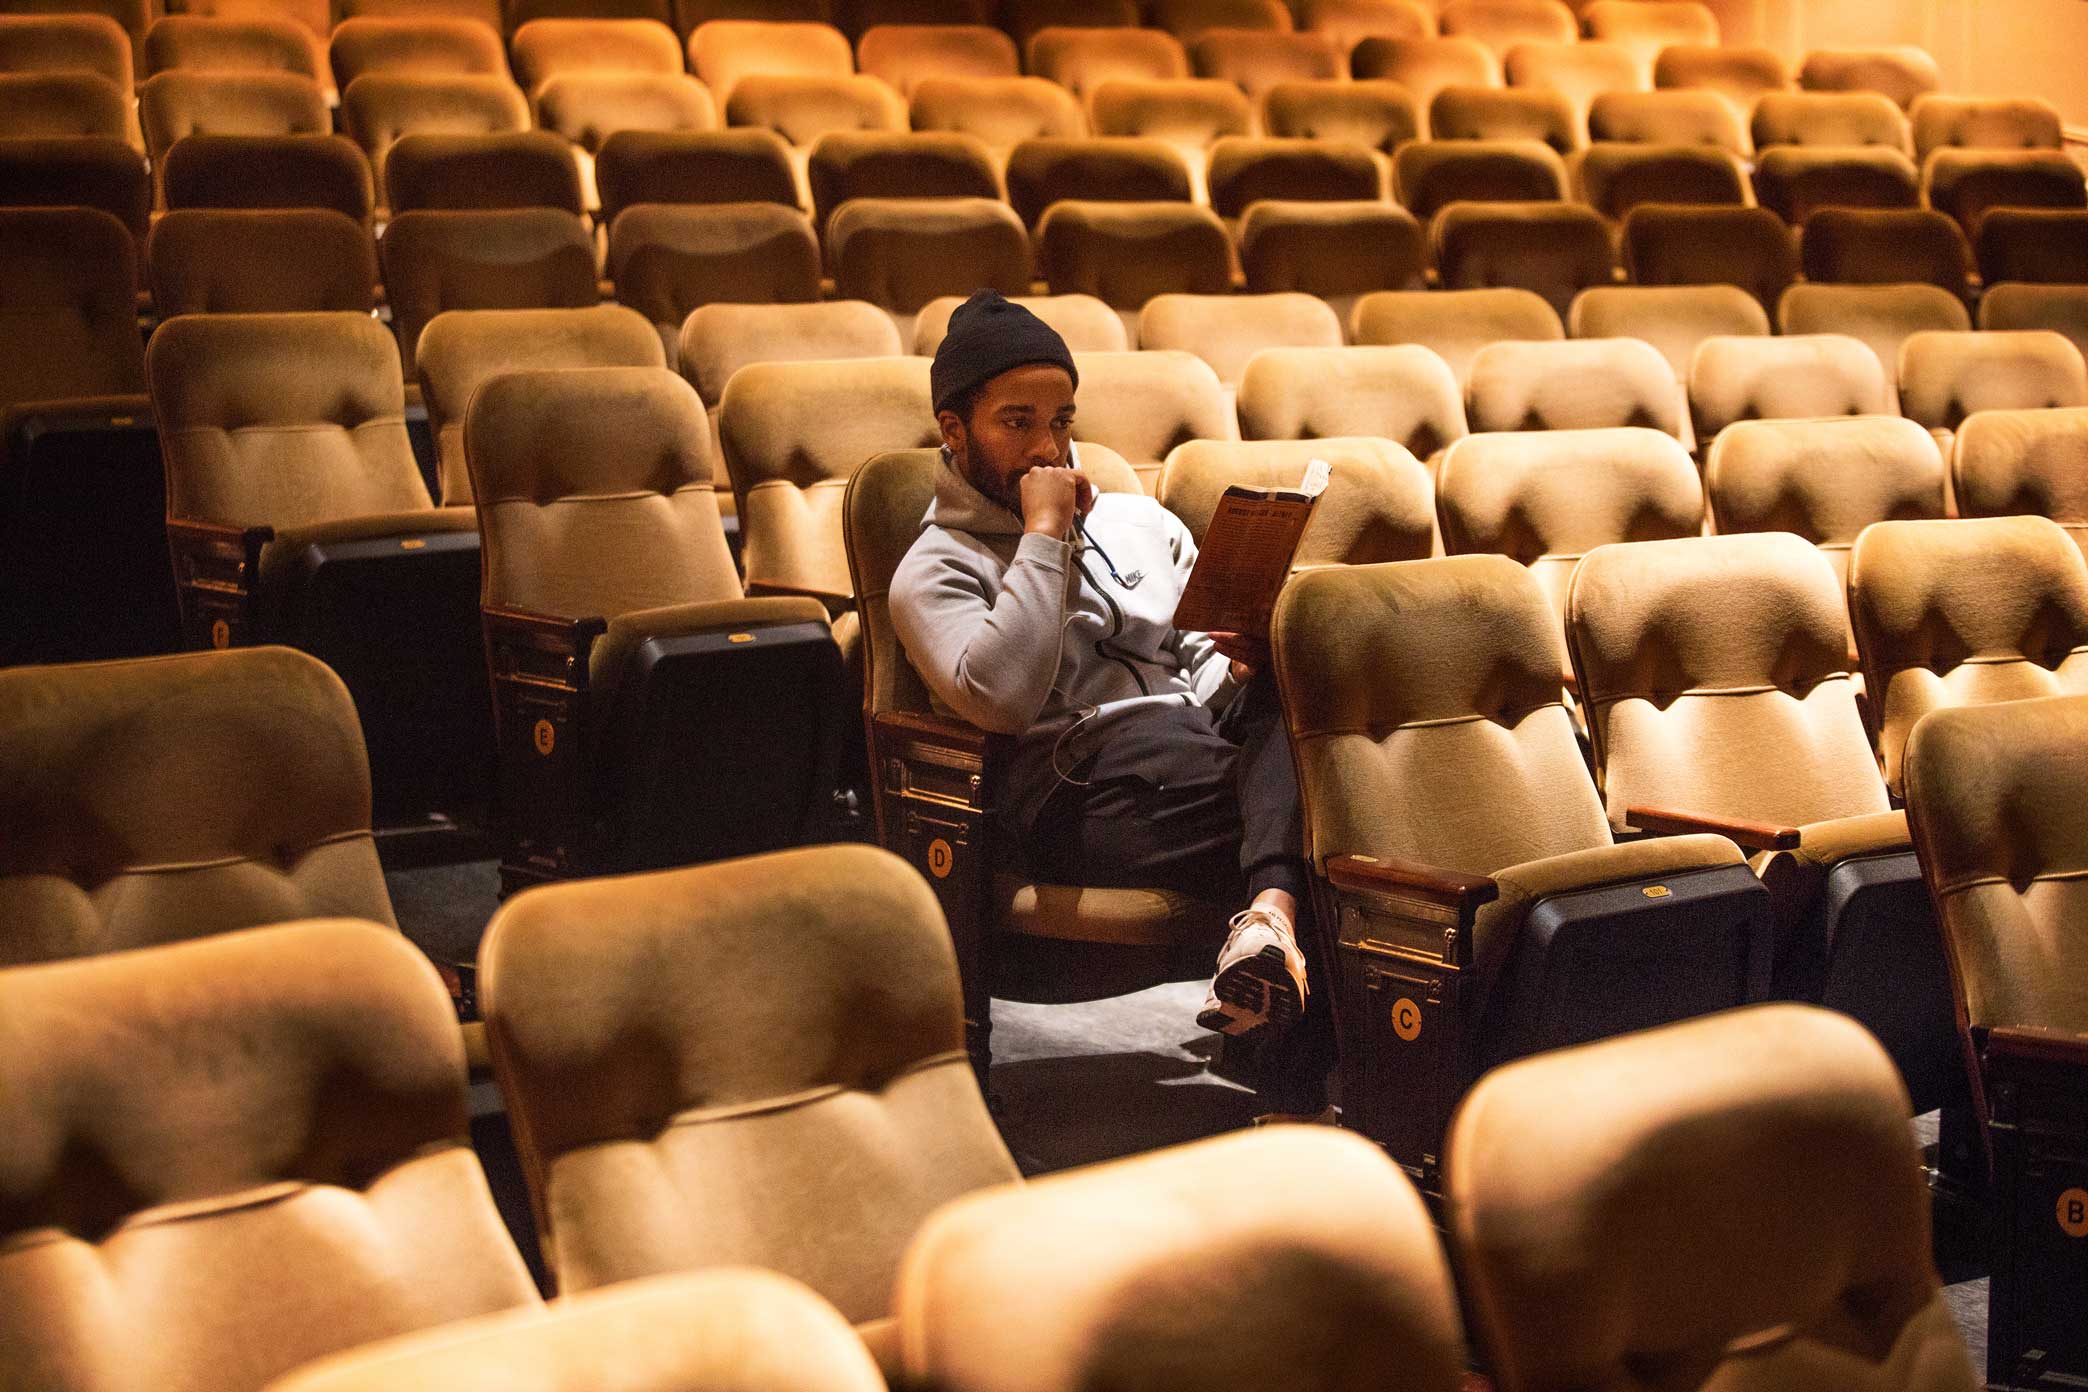  Mr. Holland reading “Jitney” before a matinee performance. “I hear new parts of the play all the time, things that I thought I understood,” he said. 